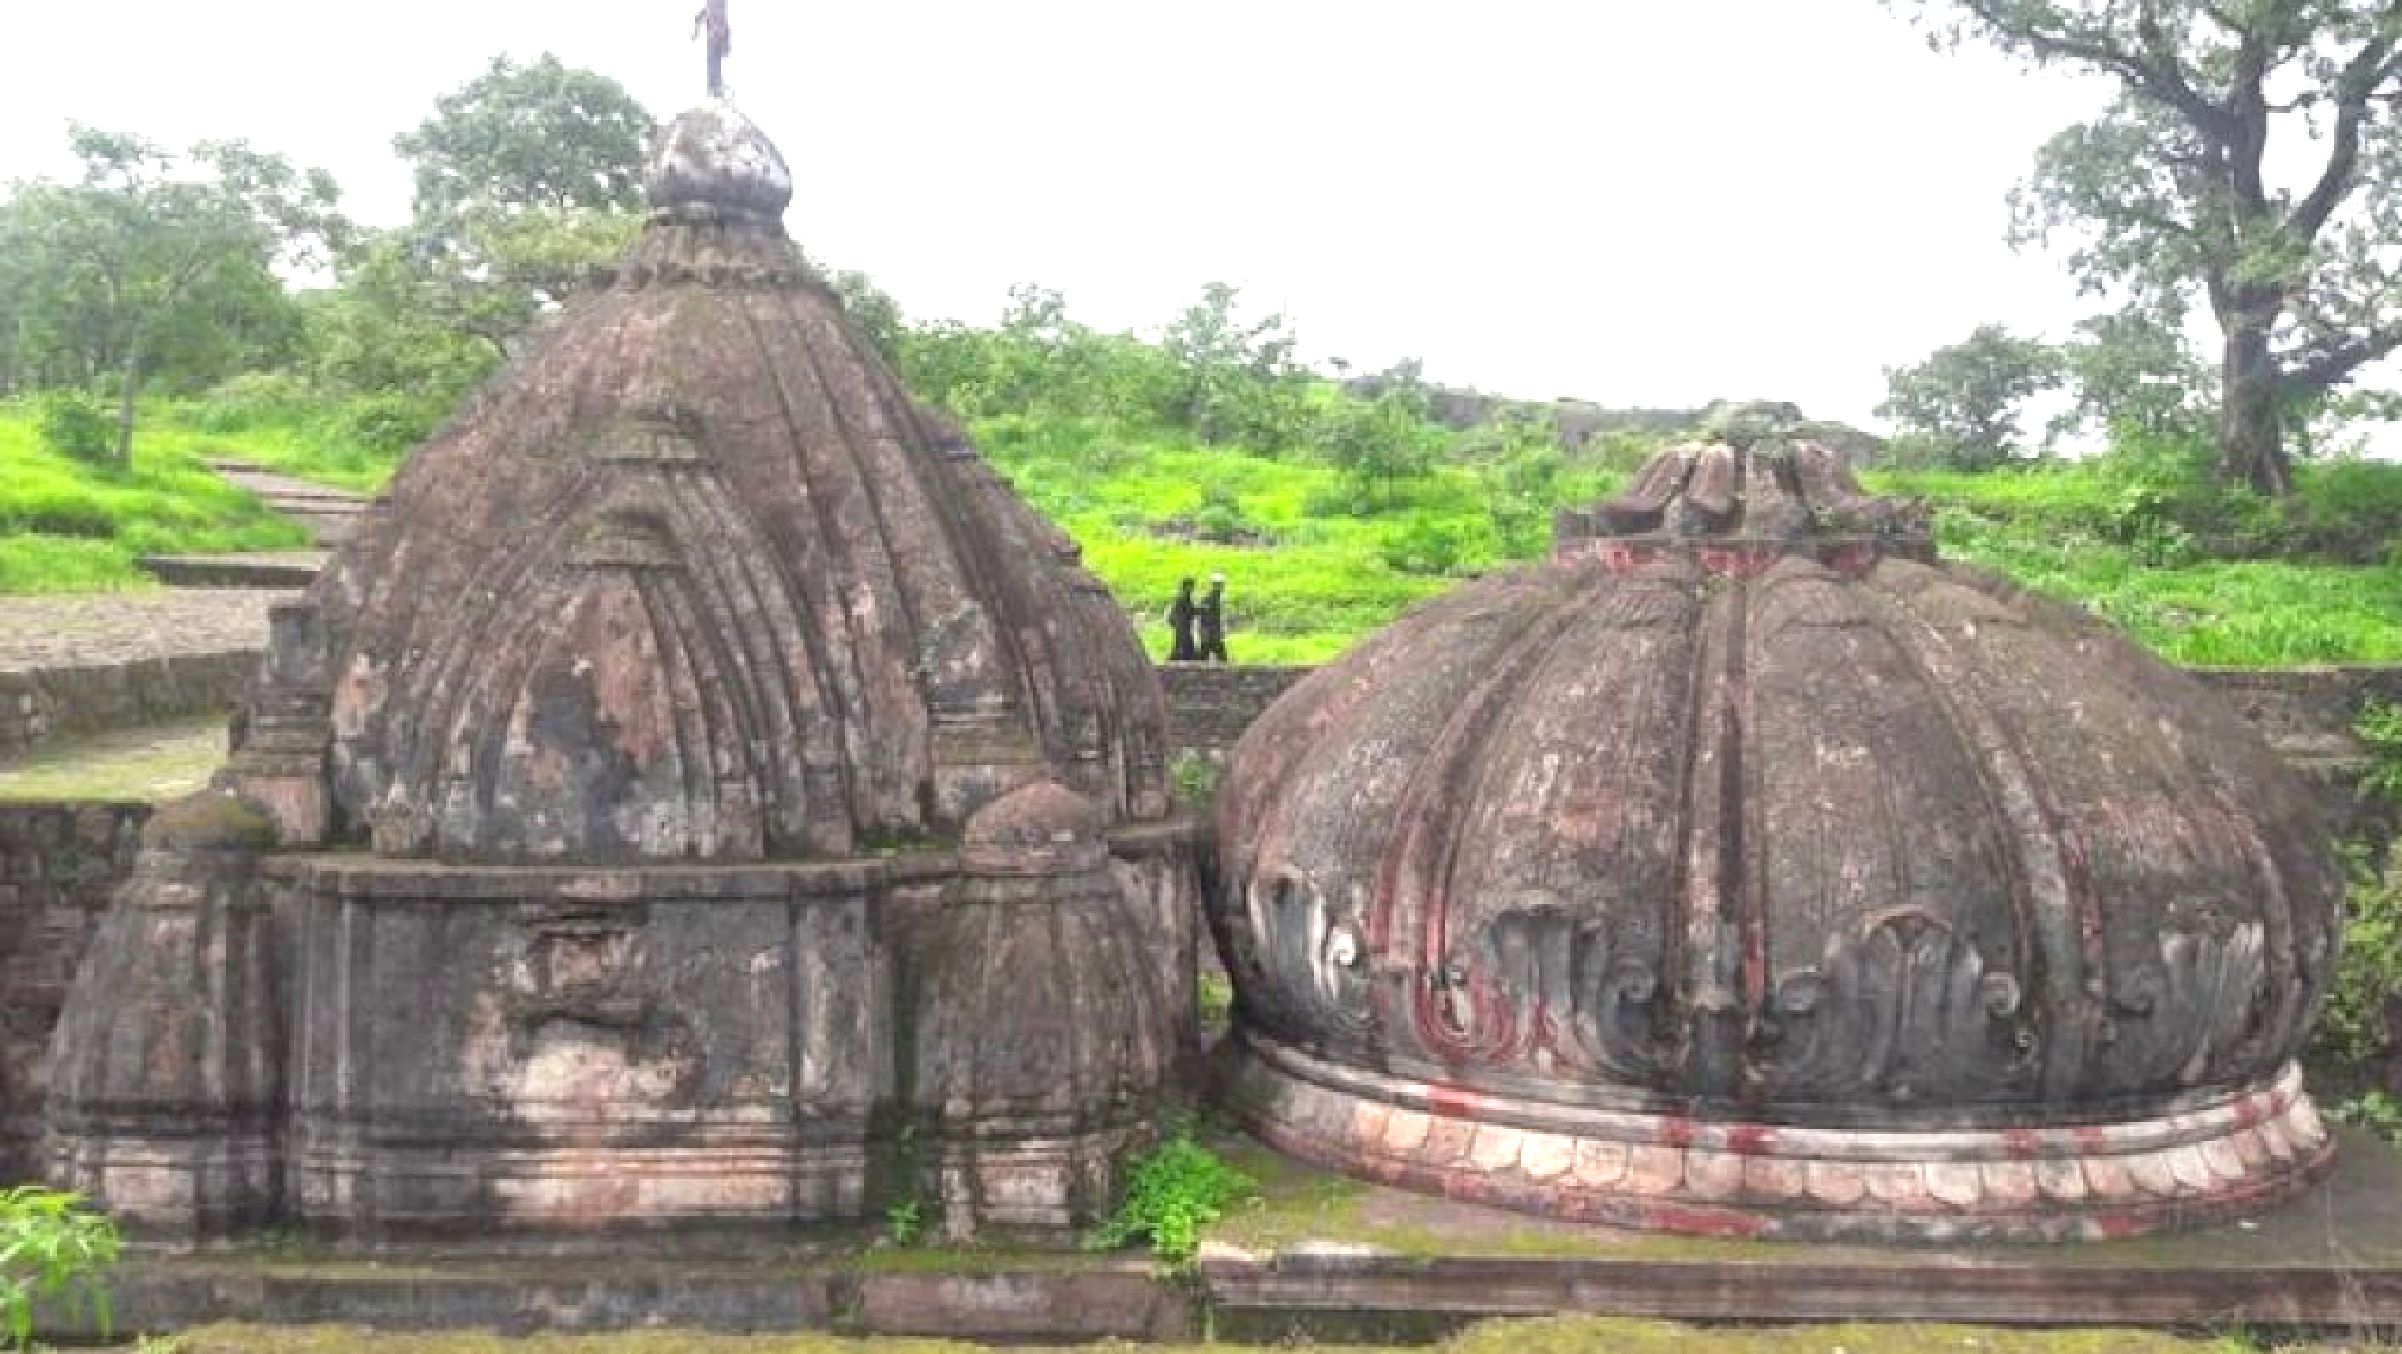 The story of this Shiva temple is from the Mahabharata period